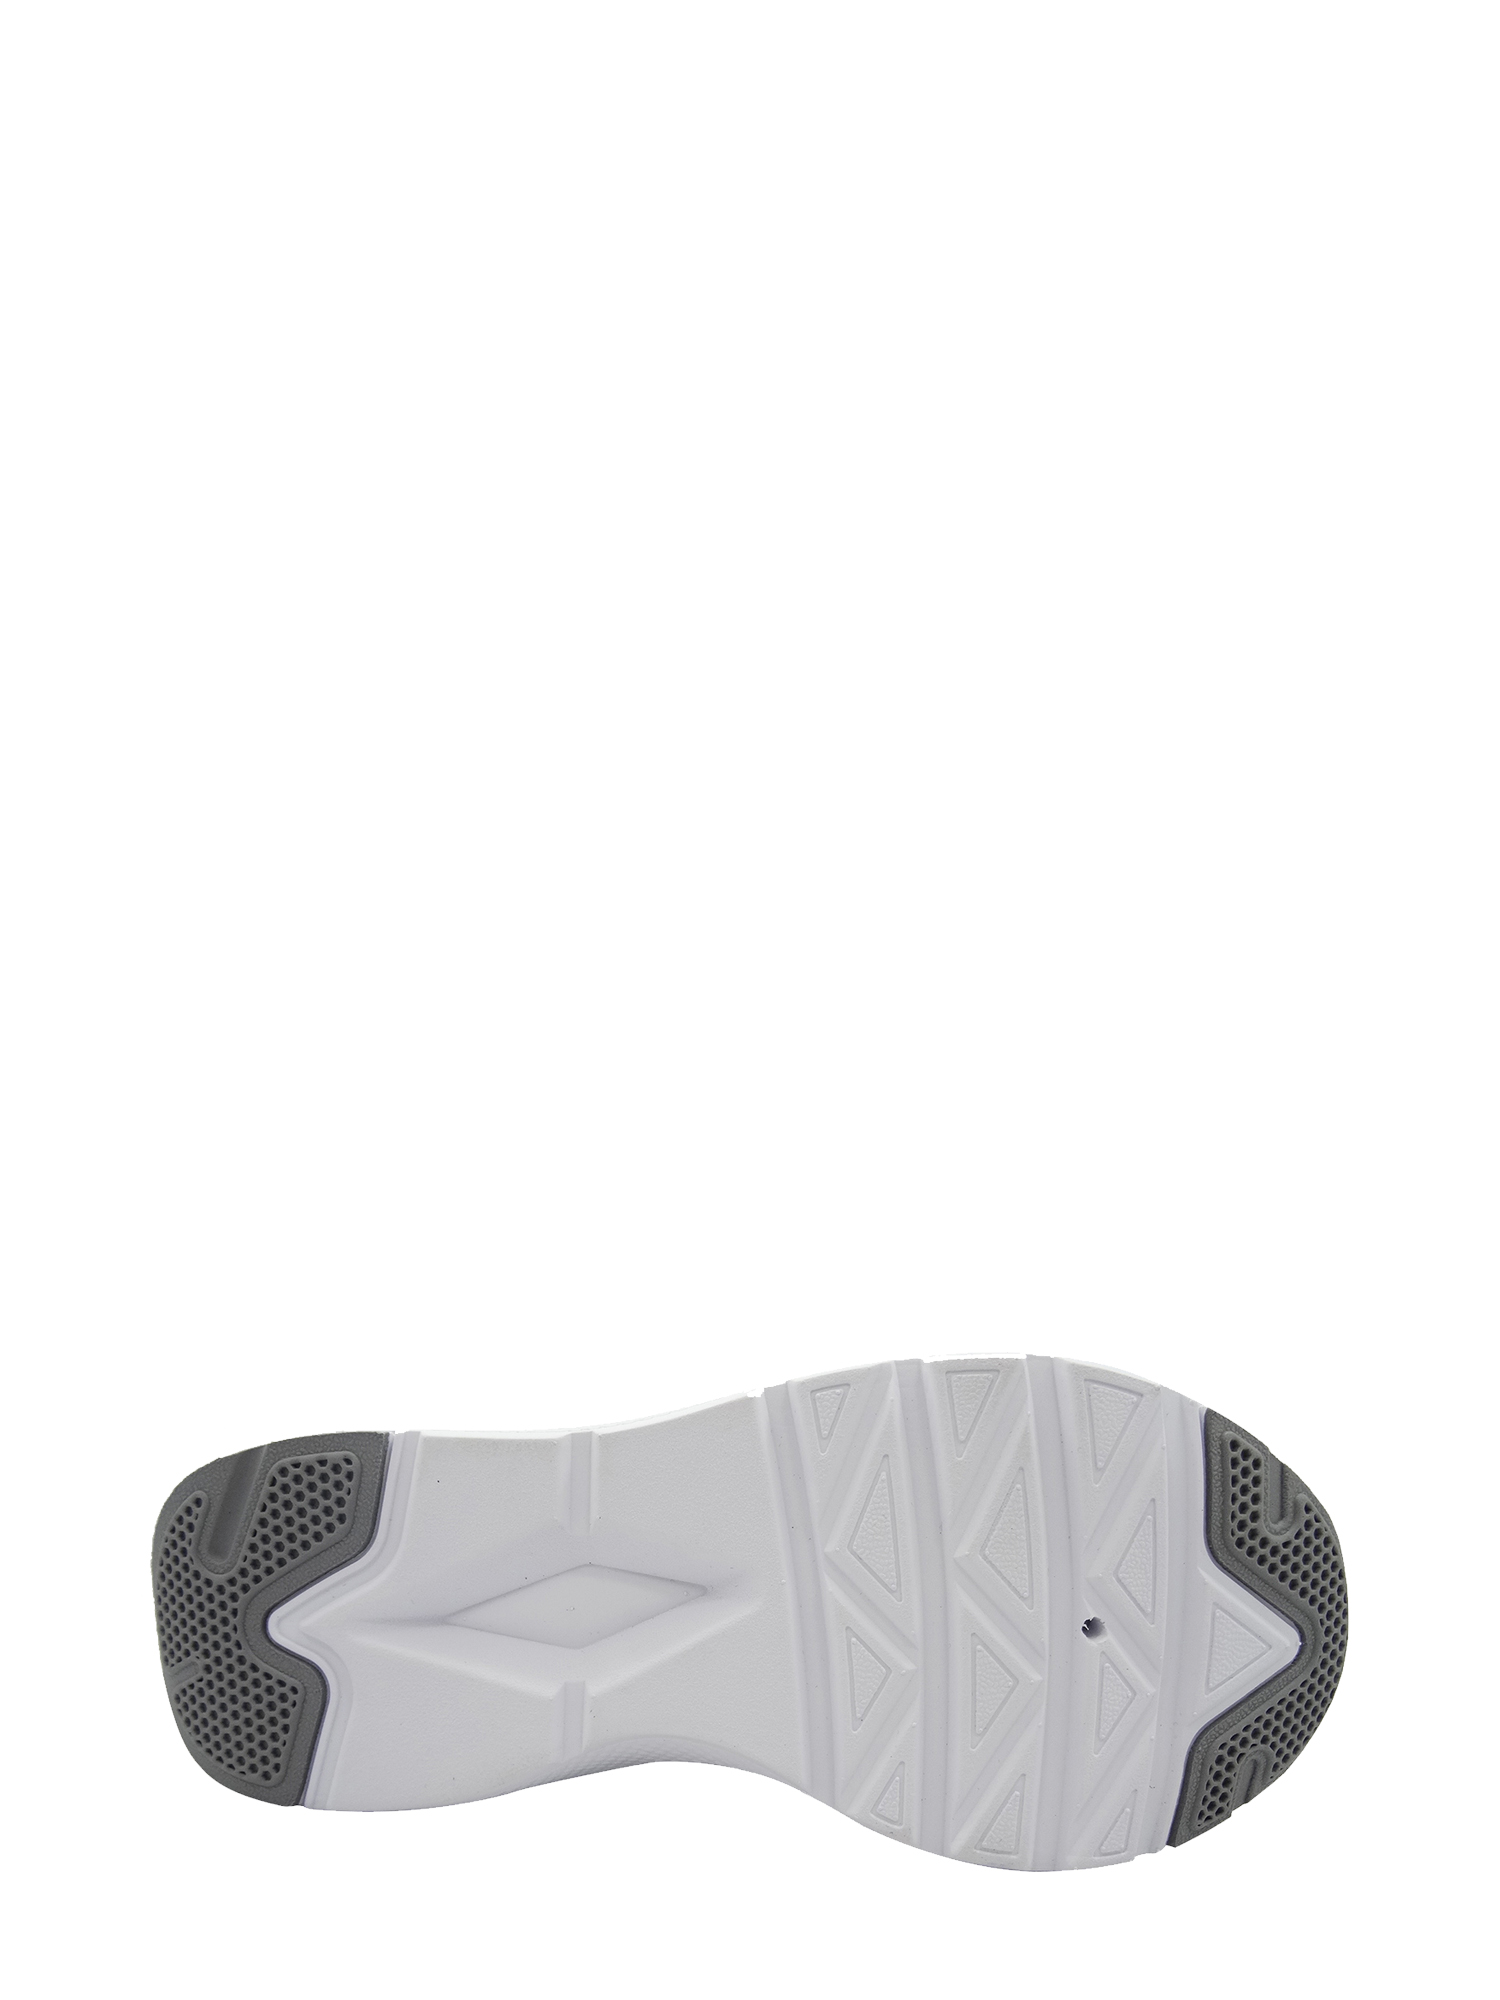 Women's Caged Mesh Athletic Shoe - image 2 of 5